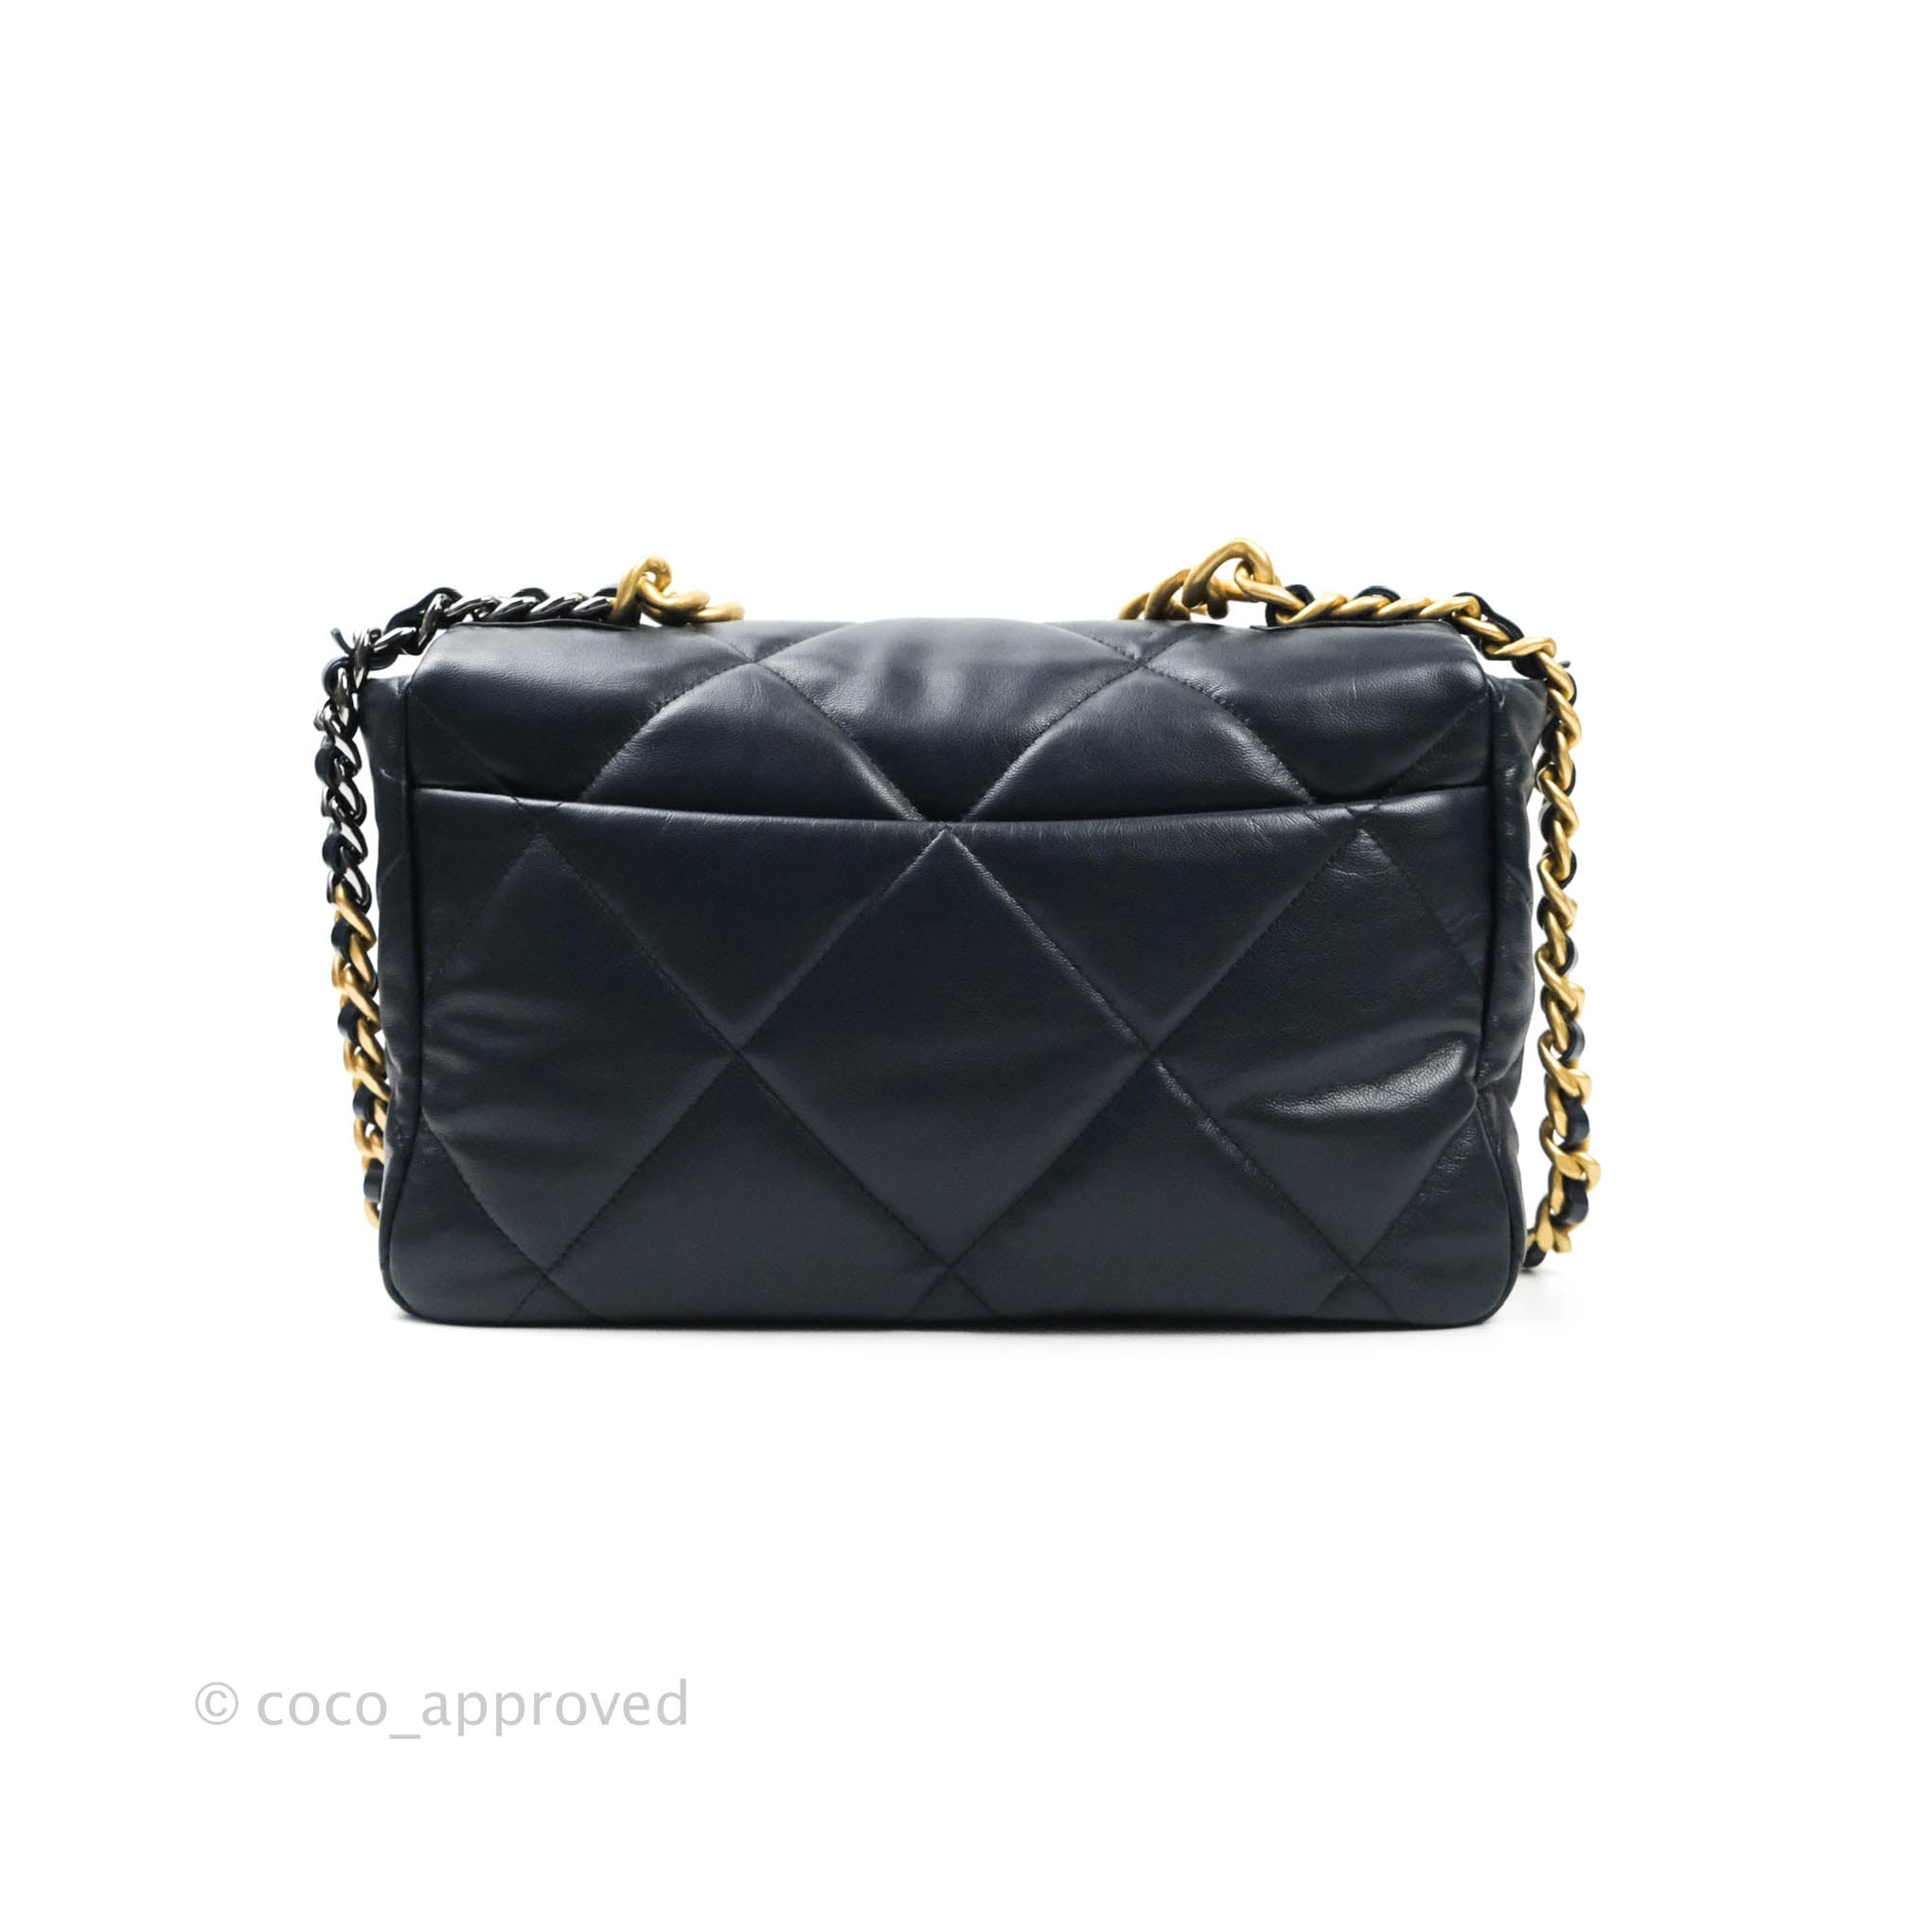 Chanel 19 Large Gray Leather Handbag available now!